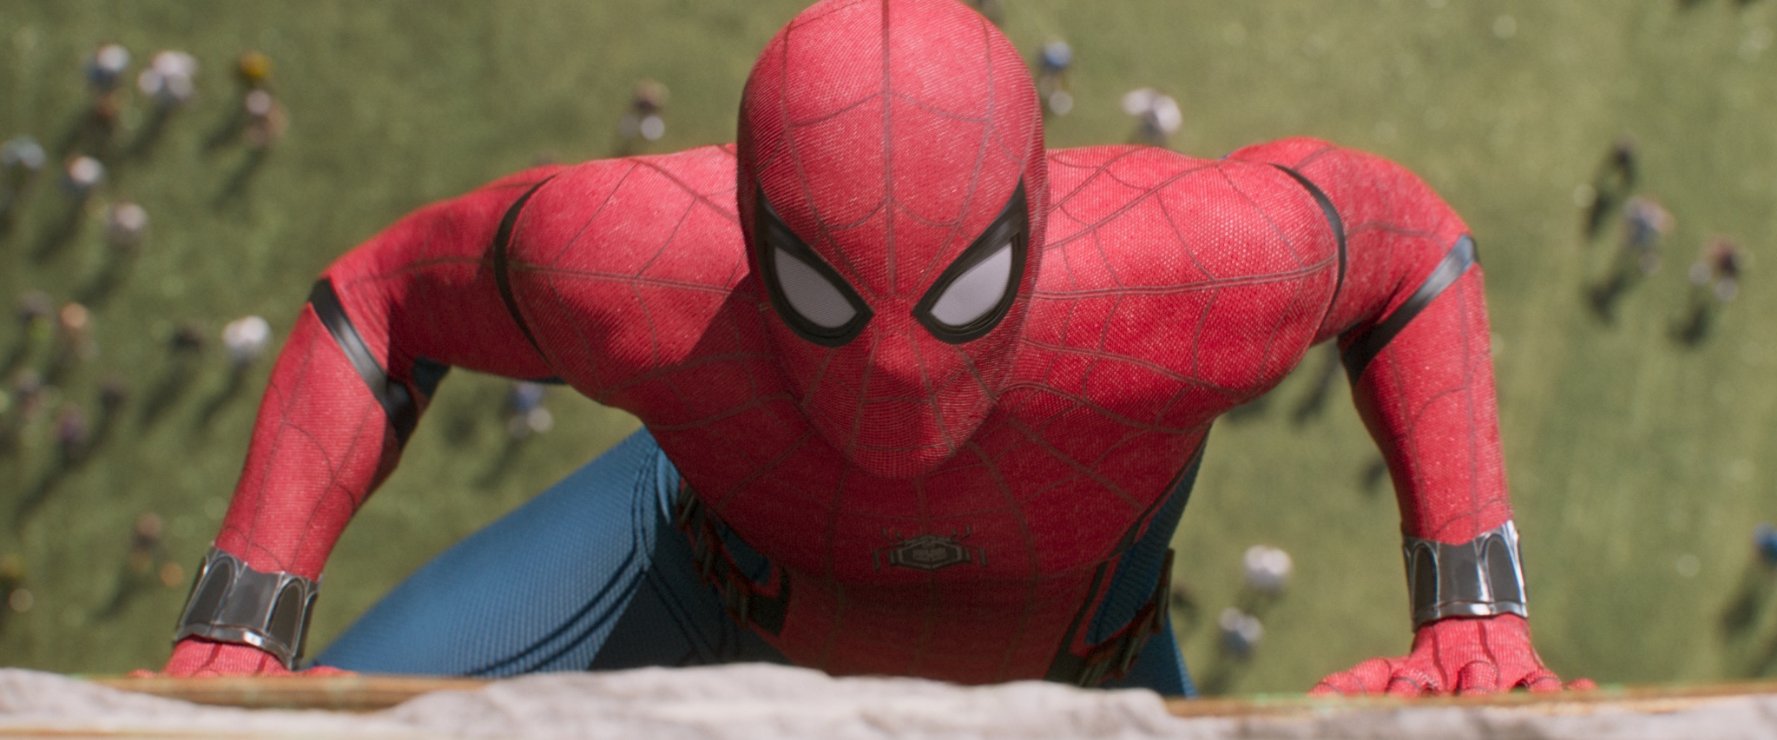 REVIEW: Spider-Man: Homecoming